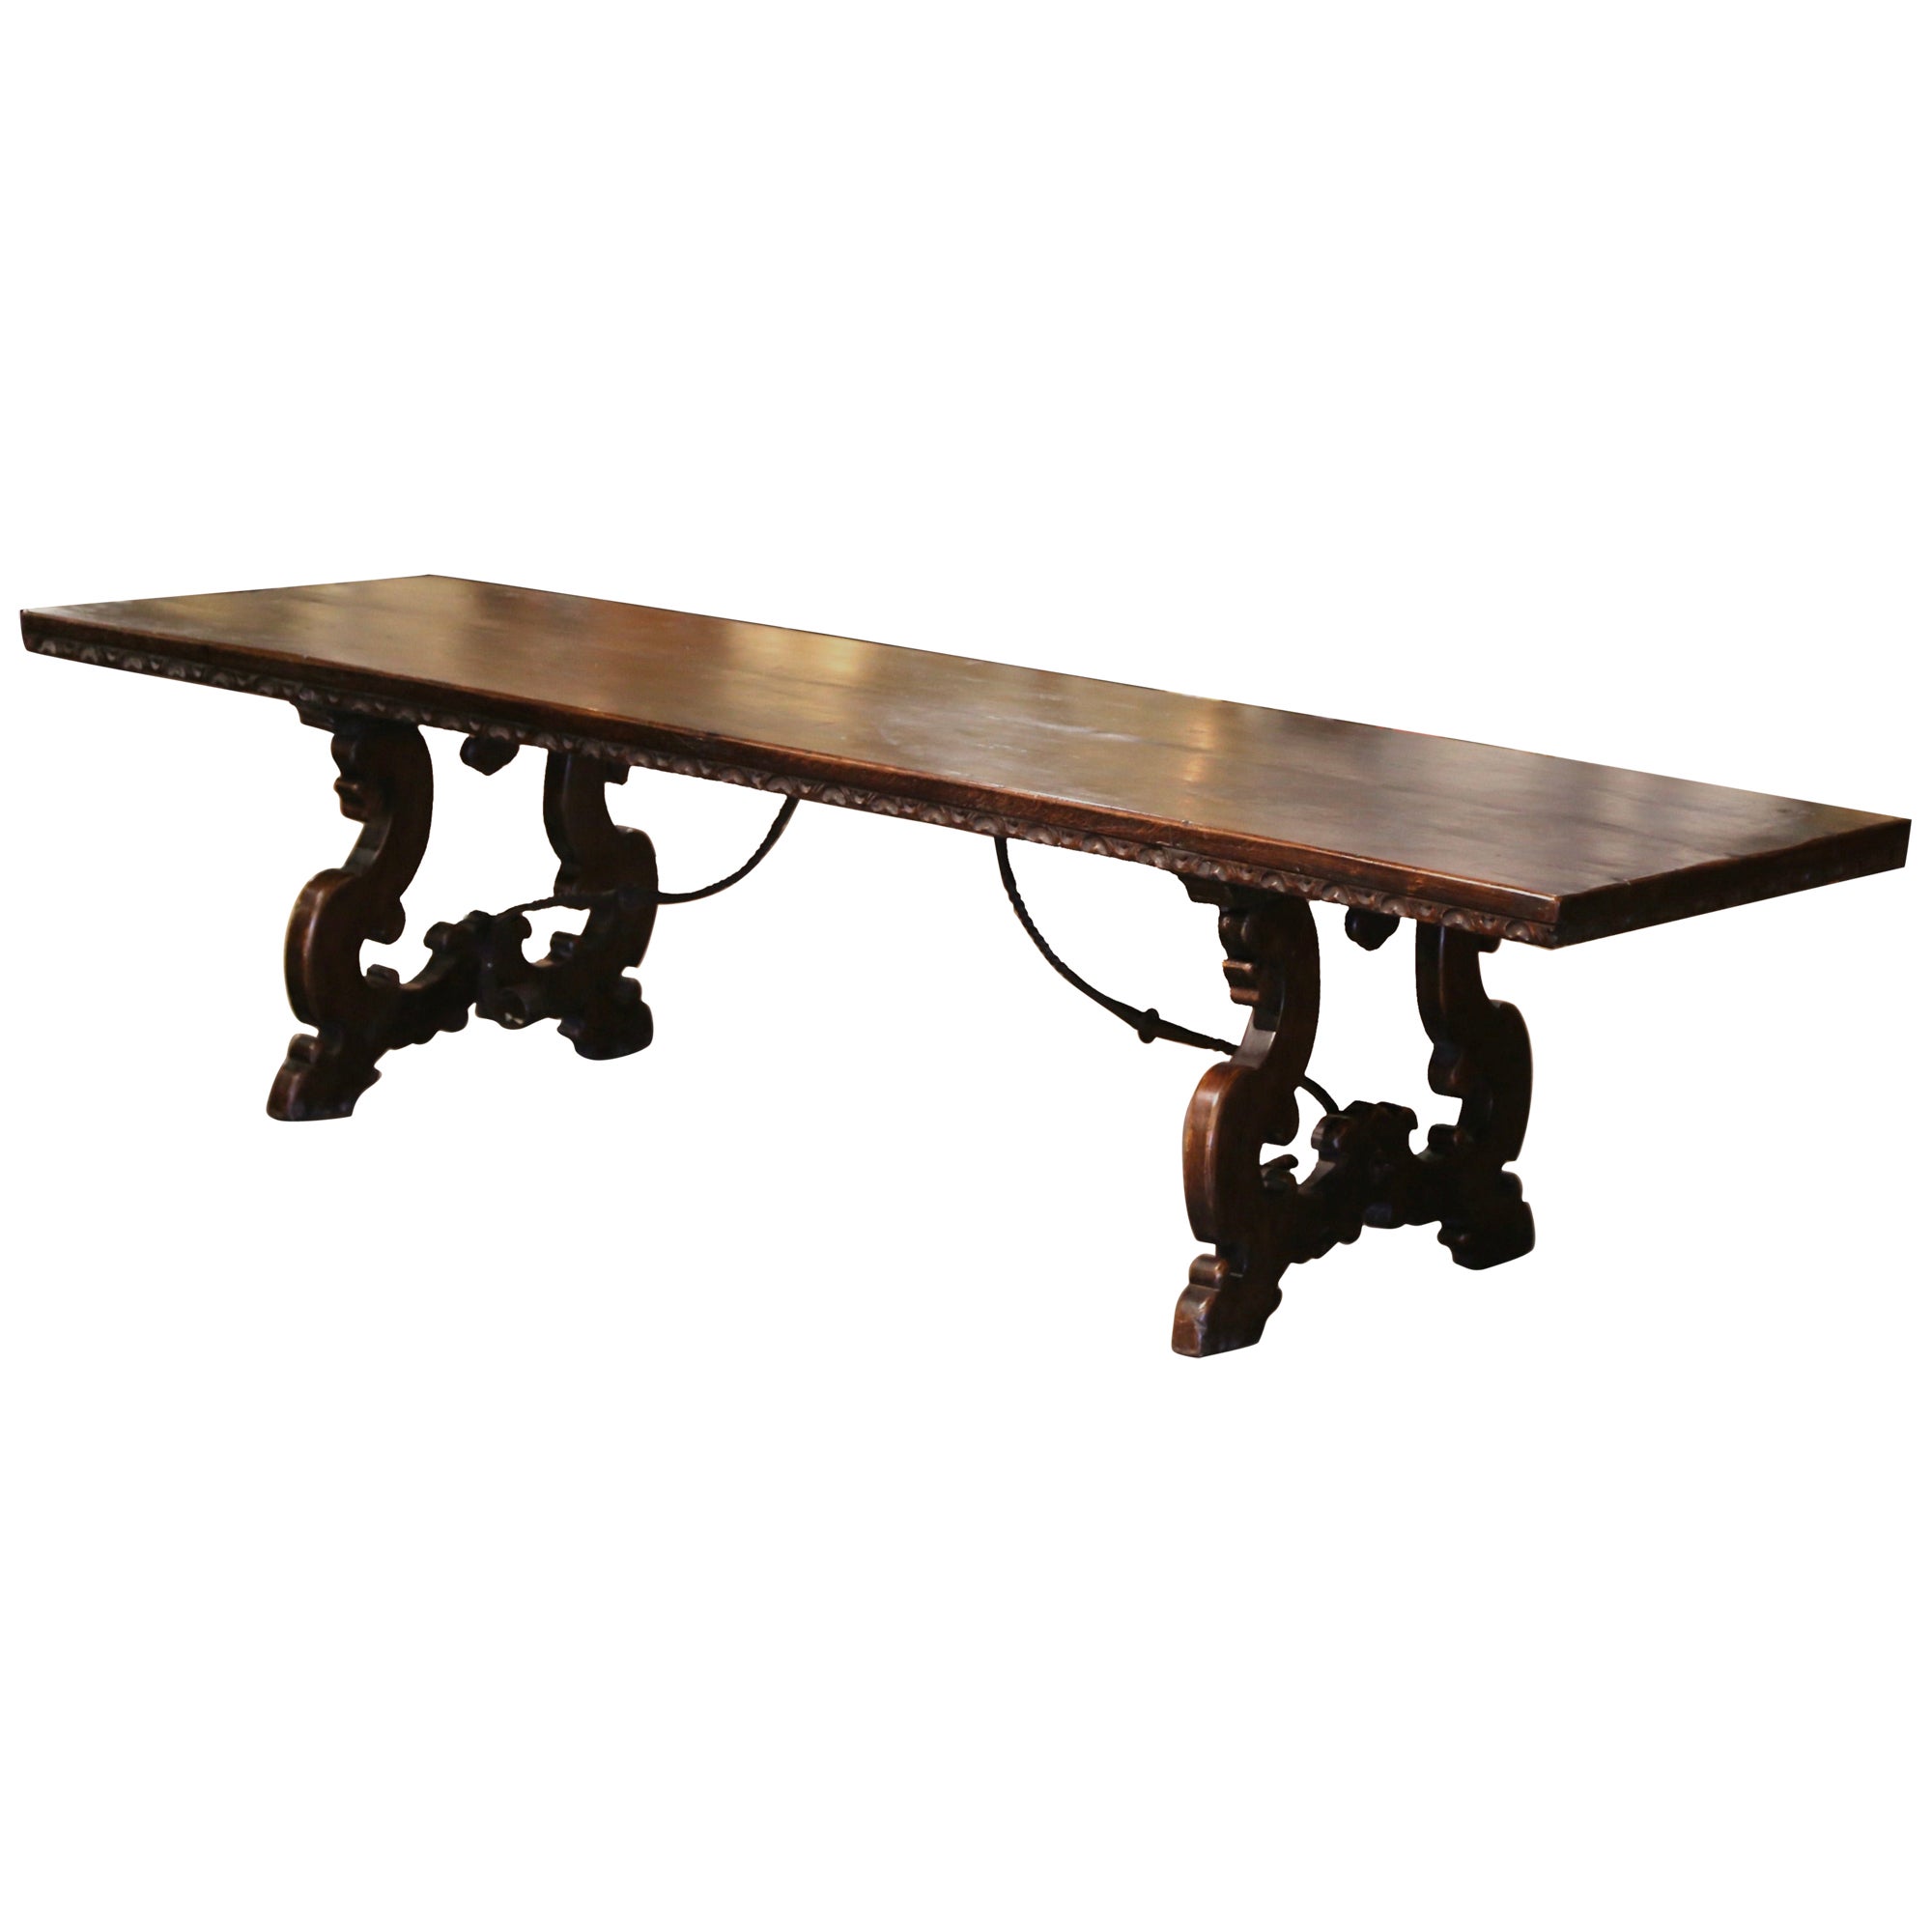 19th Century Italian Baroque Carved Walnut and Wrought Iron Trestle Dining Table